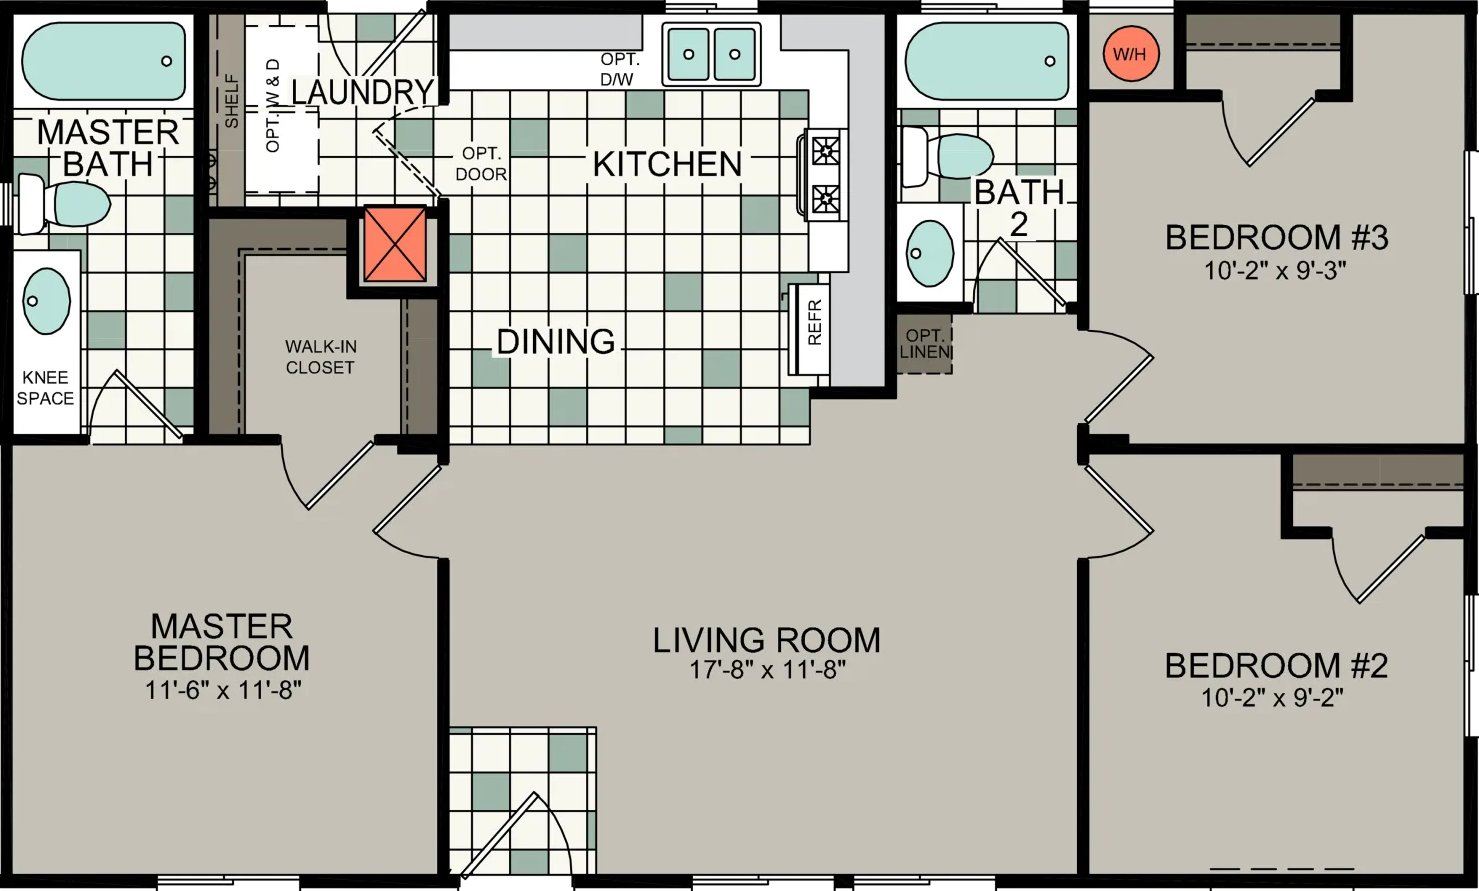 Bd 03 floor plan cropped and hero home features